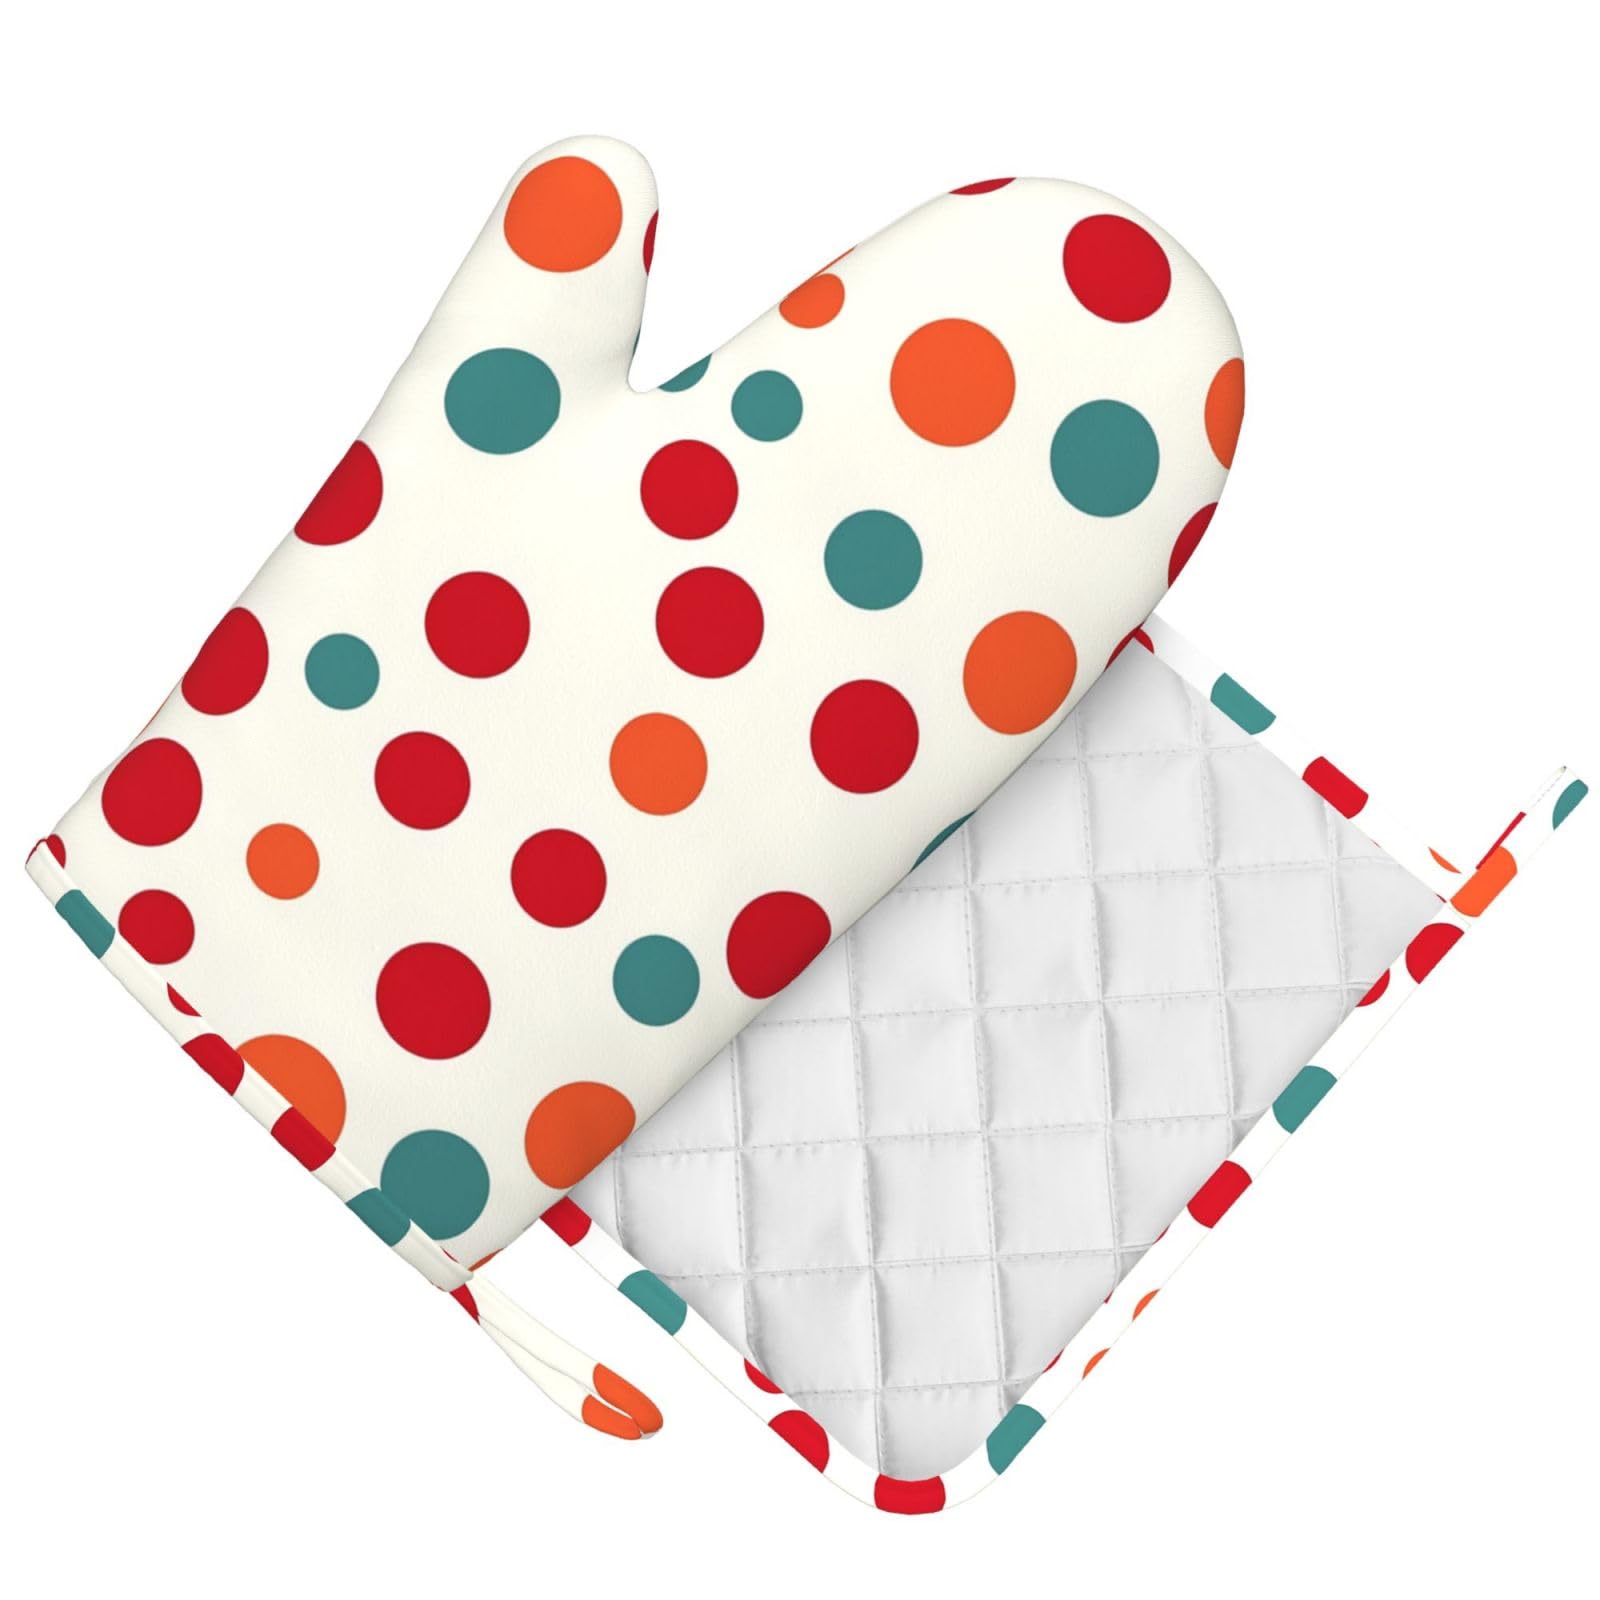 Polka Dot Printed Oven Mitts and Pot Holders Sets Heat Resistant Kitchen Oven Gloves Potholders Set Extra Long Non-Slip Silicone Gloves for Cooking Baking BBQ